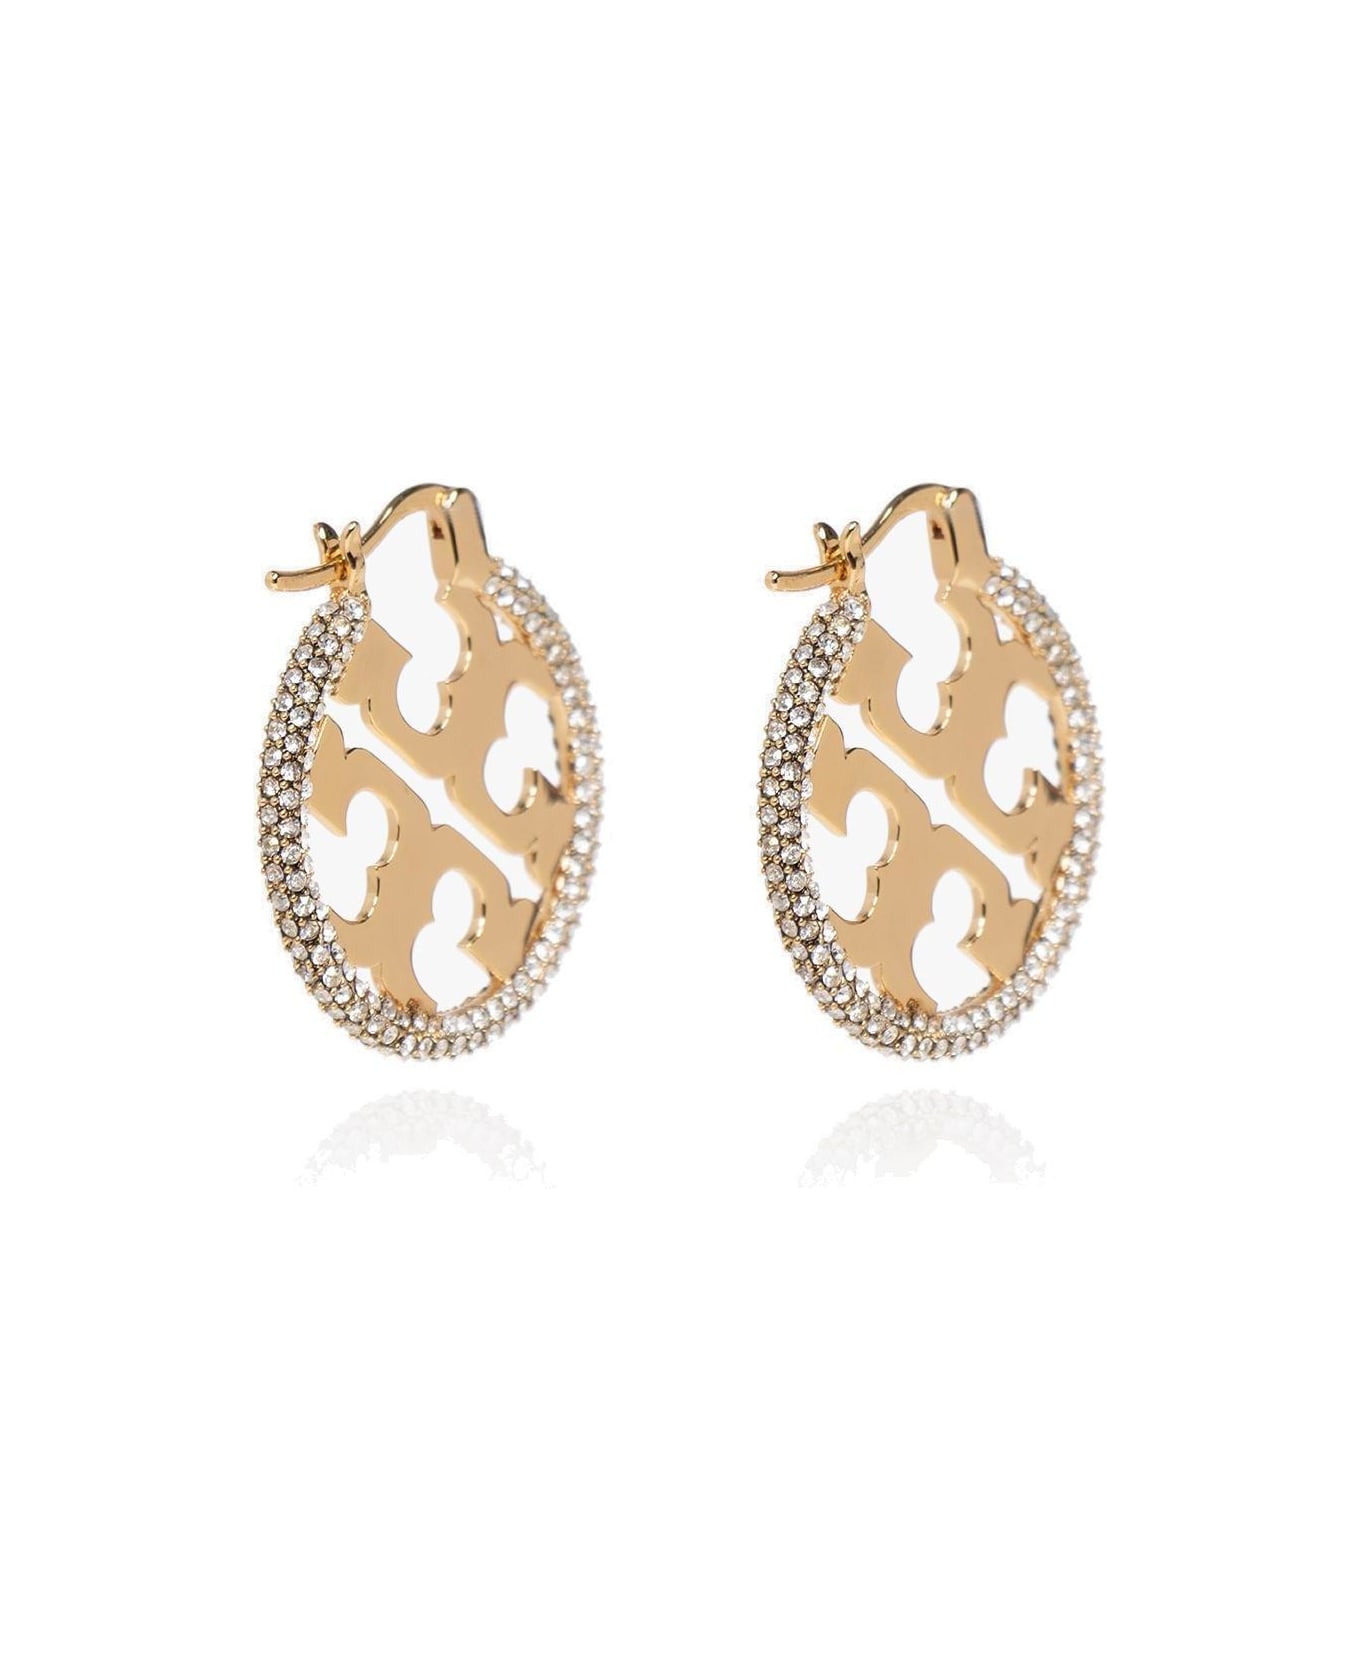 Tory Burch Miller Logo Plaque Earrings - Tory gold/crystal